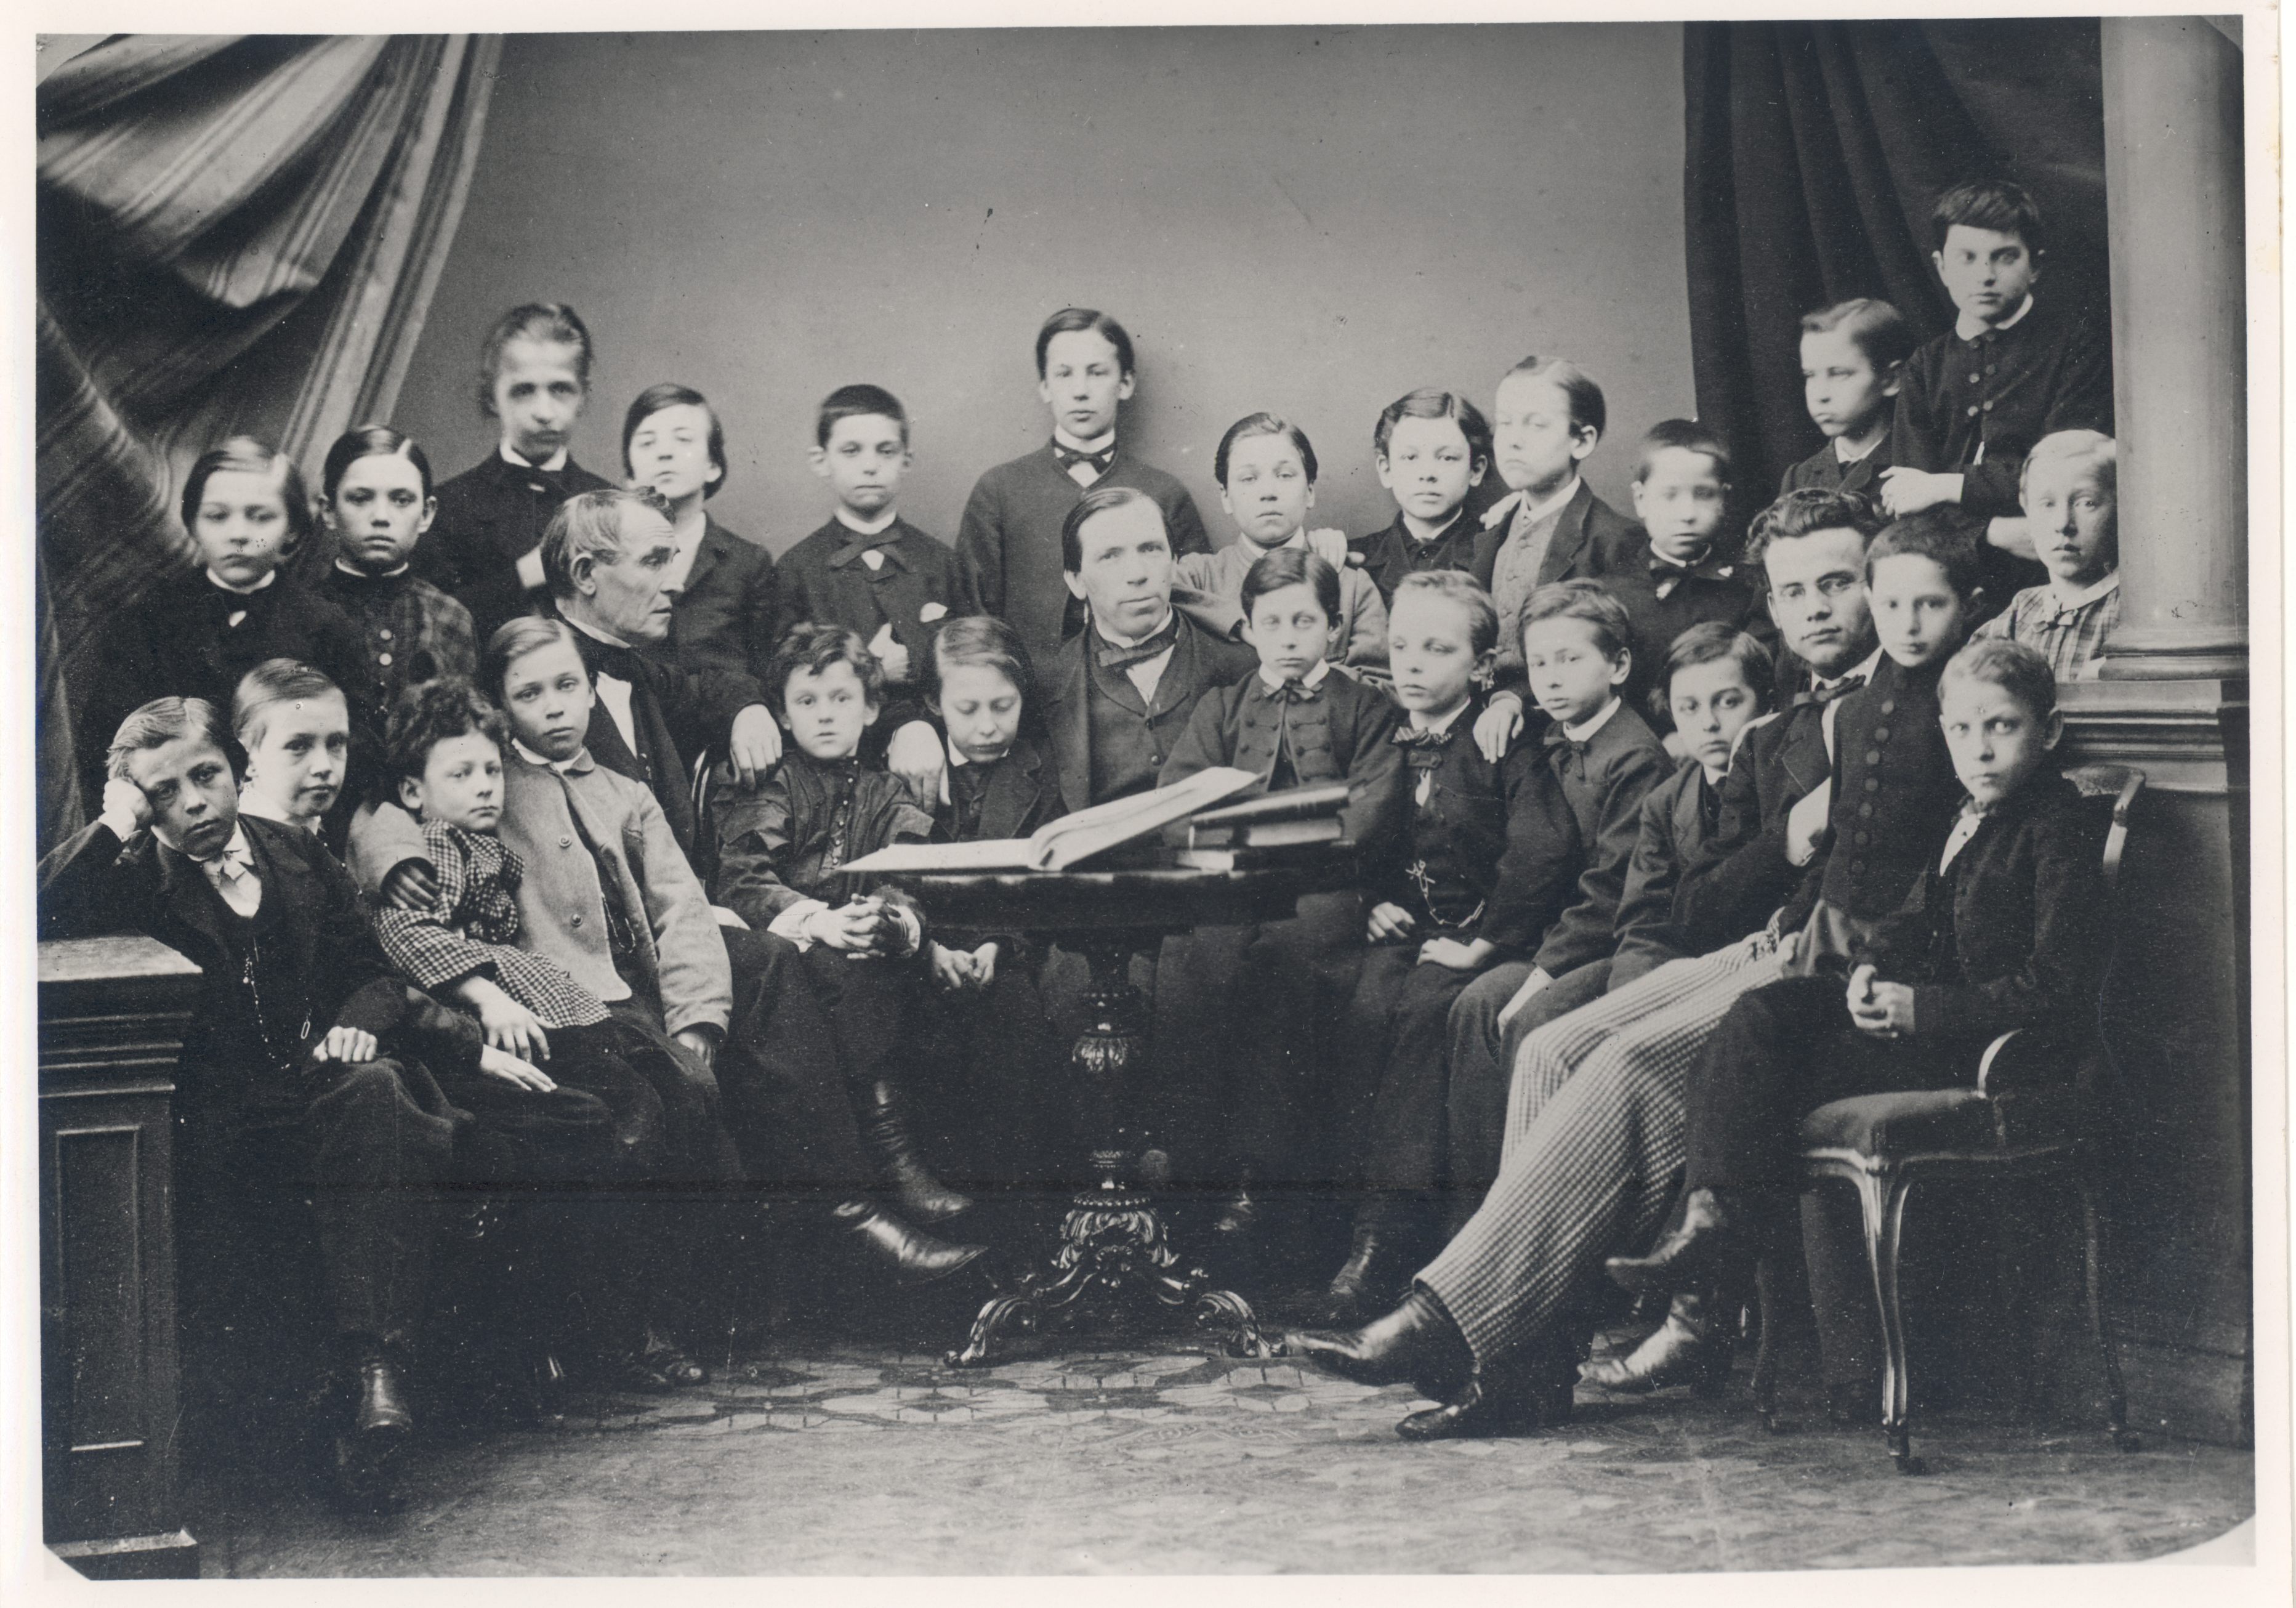 Jakobson, C. R. Petersburg with teachers Popov, Constantinov and students